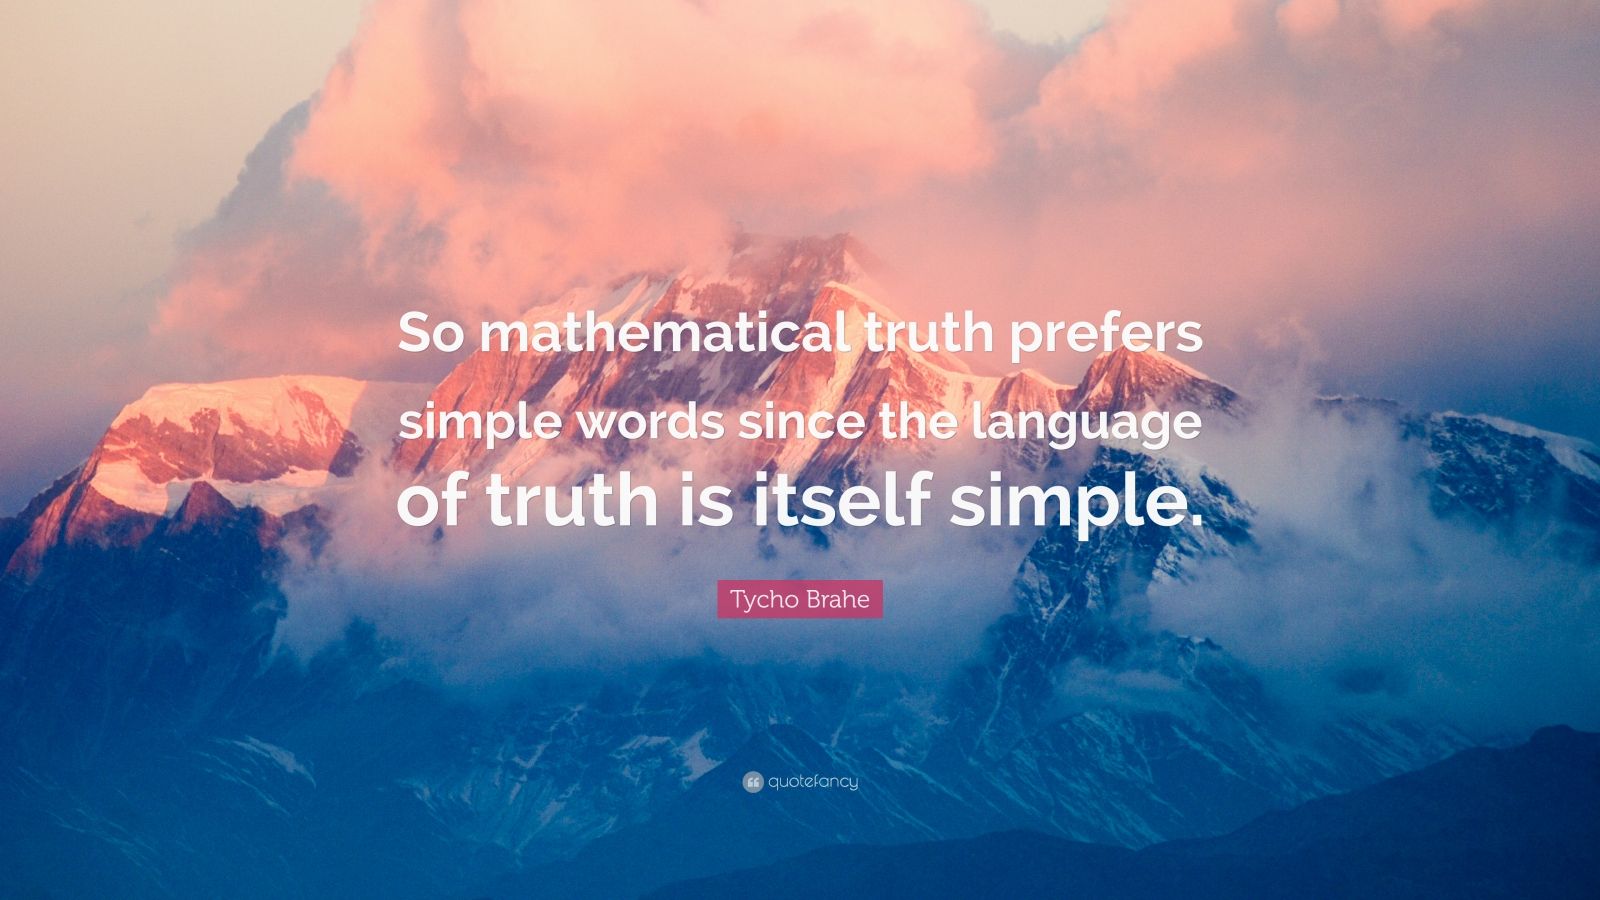 Tycho Brahe Quote: "So mathematical truth prefers simple words since the language of truth is ...